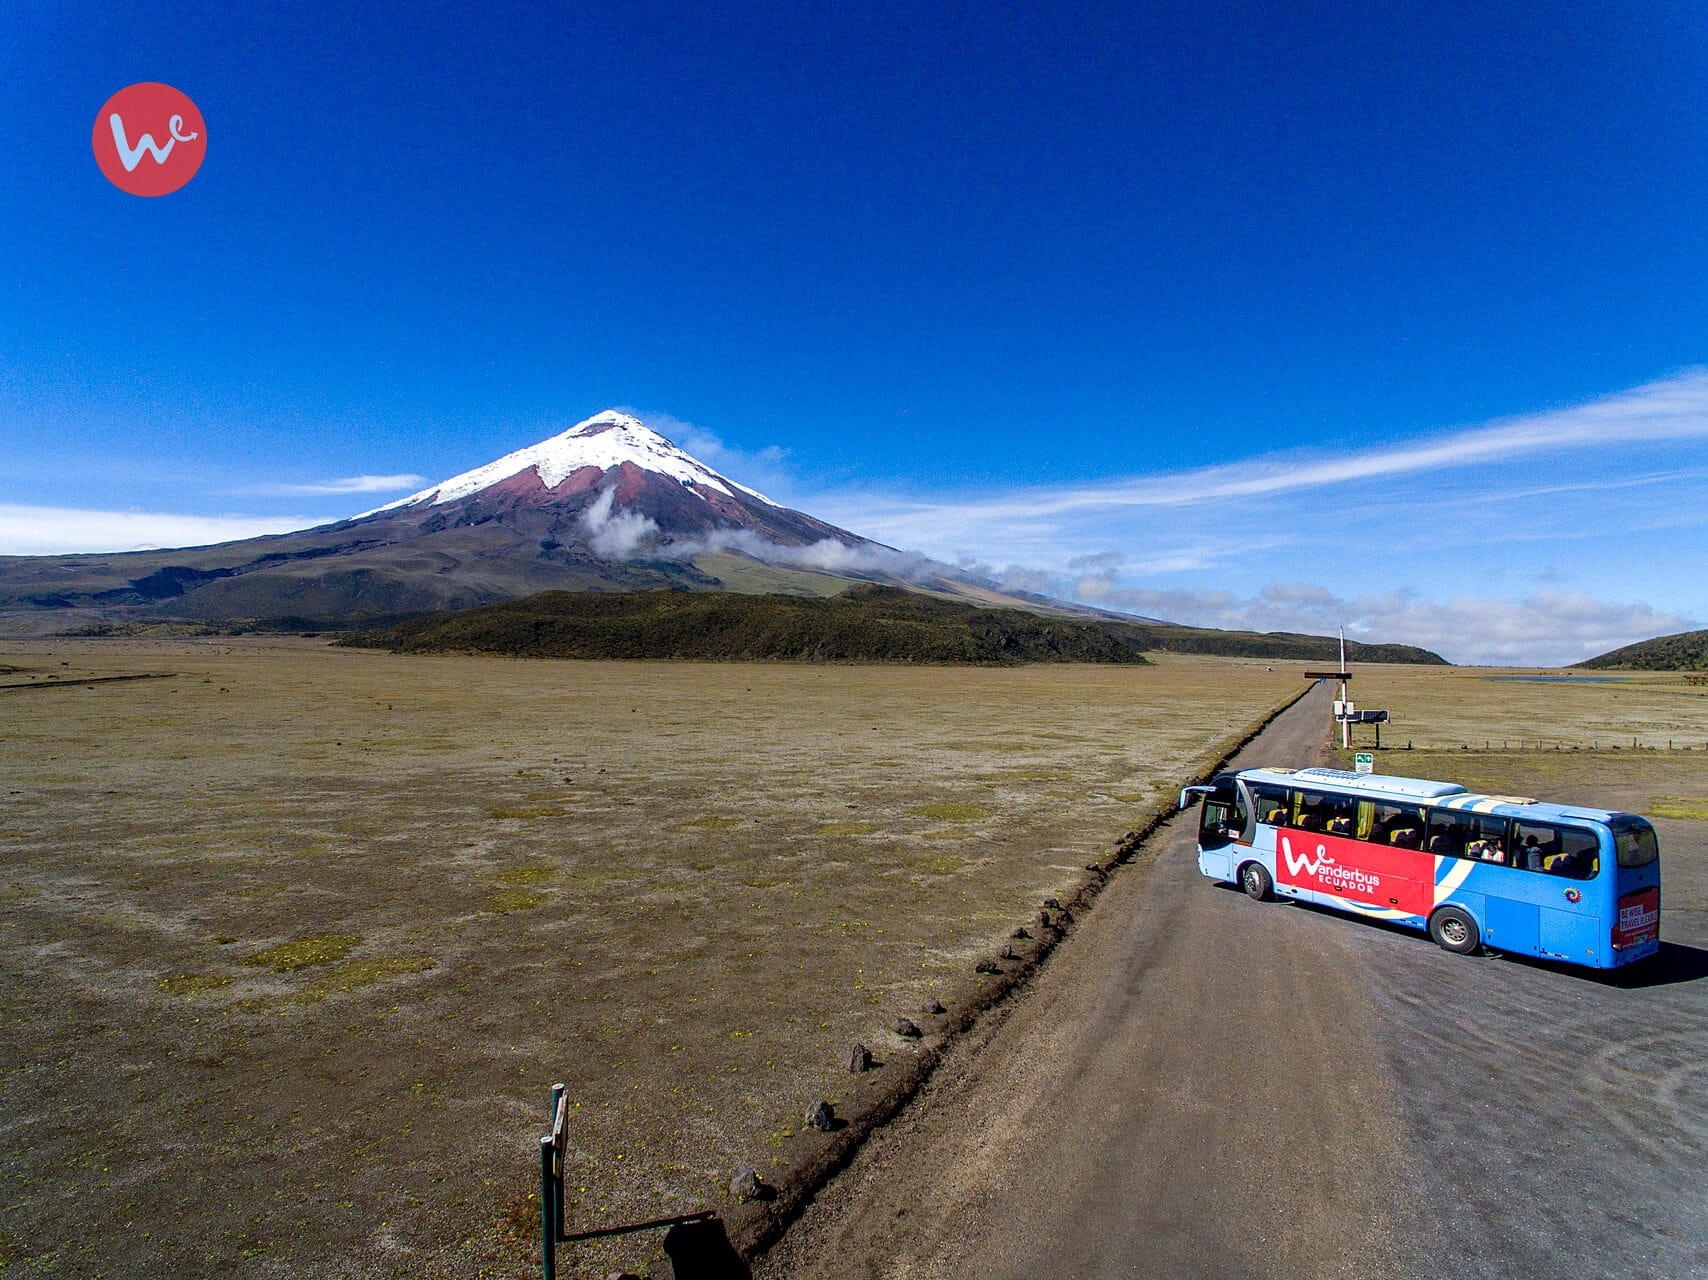 When to visit Cotopaxi